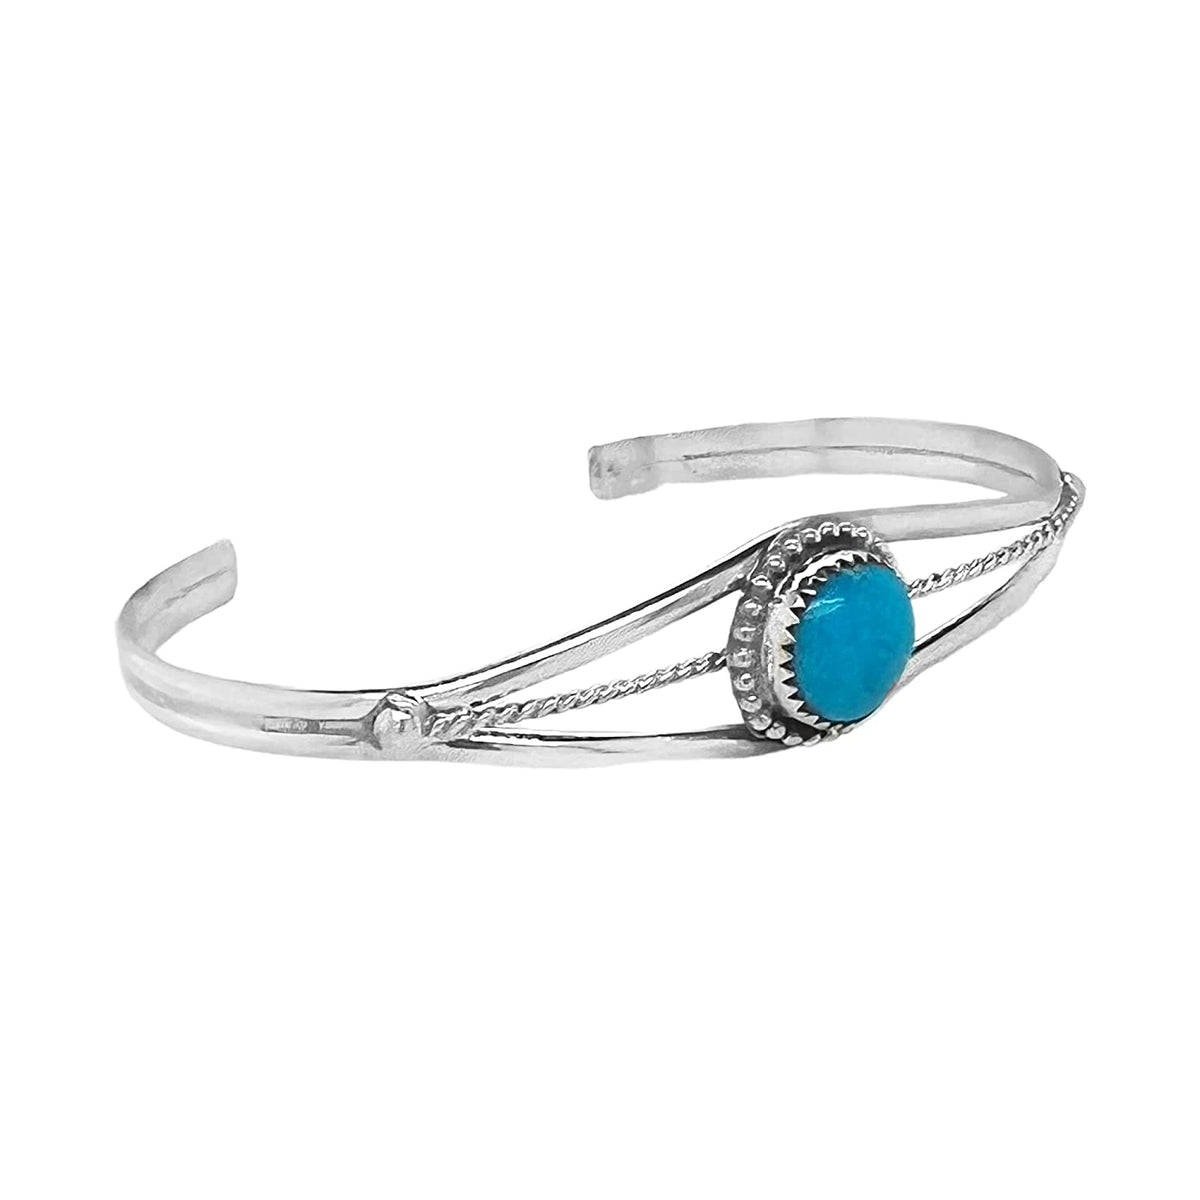 Genuine Sleeping Beauty Turquoise Cuff Bracelet, Sterling Silver, Authentic Native American USA Handmade, Size Women's Small